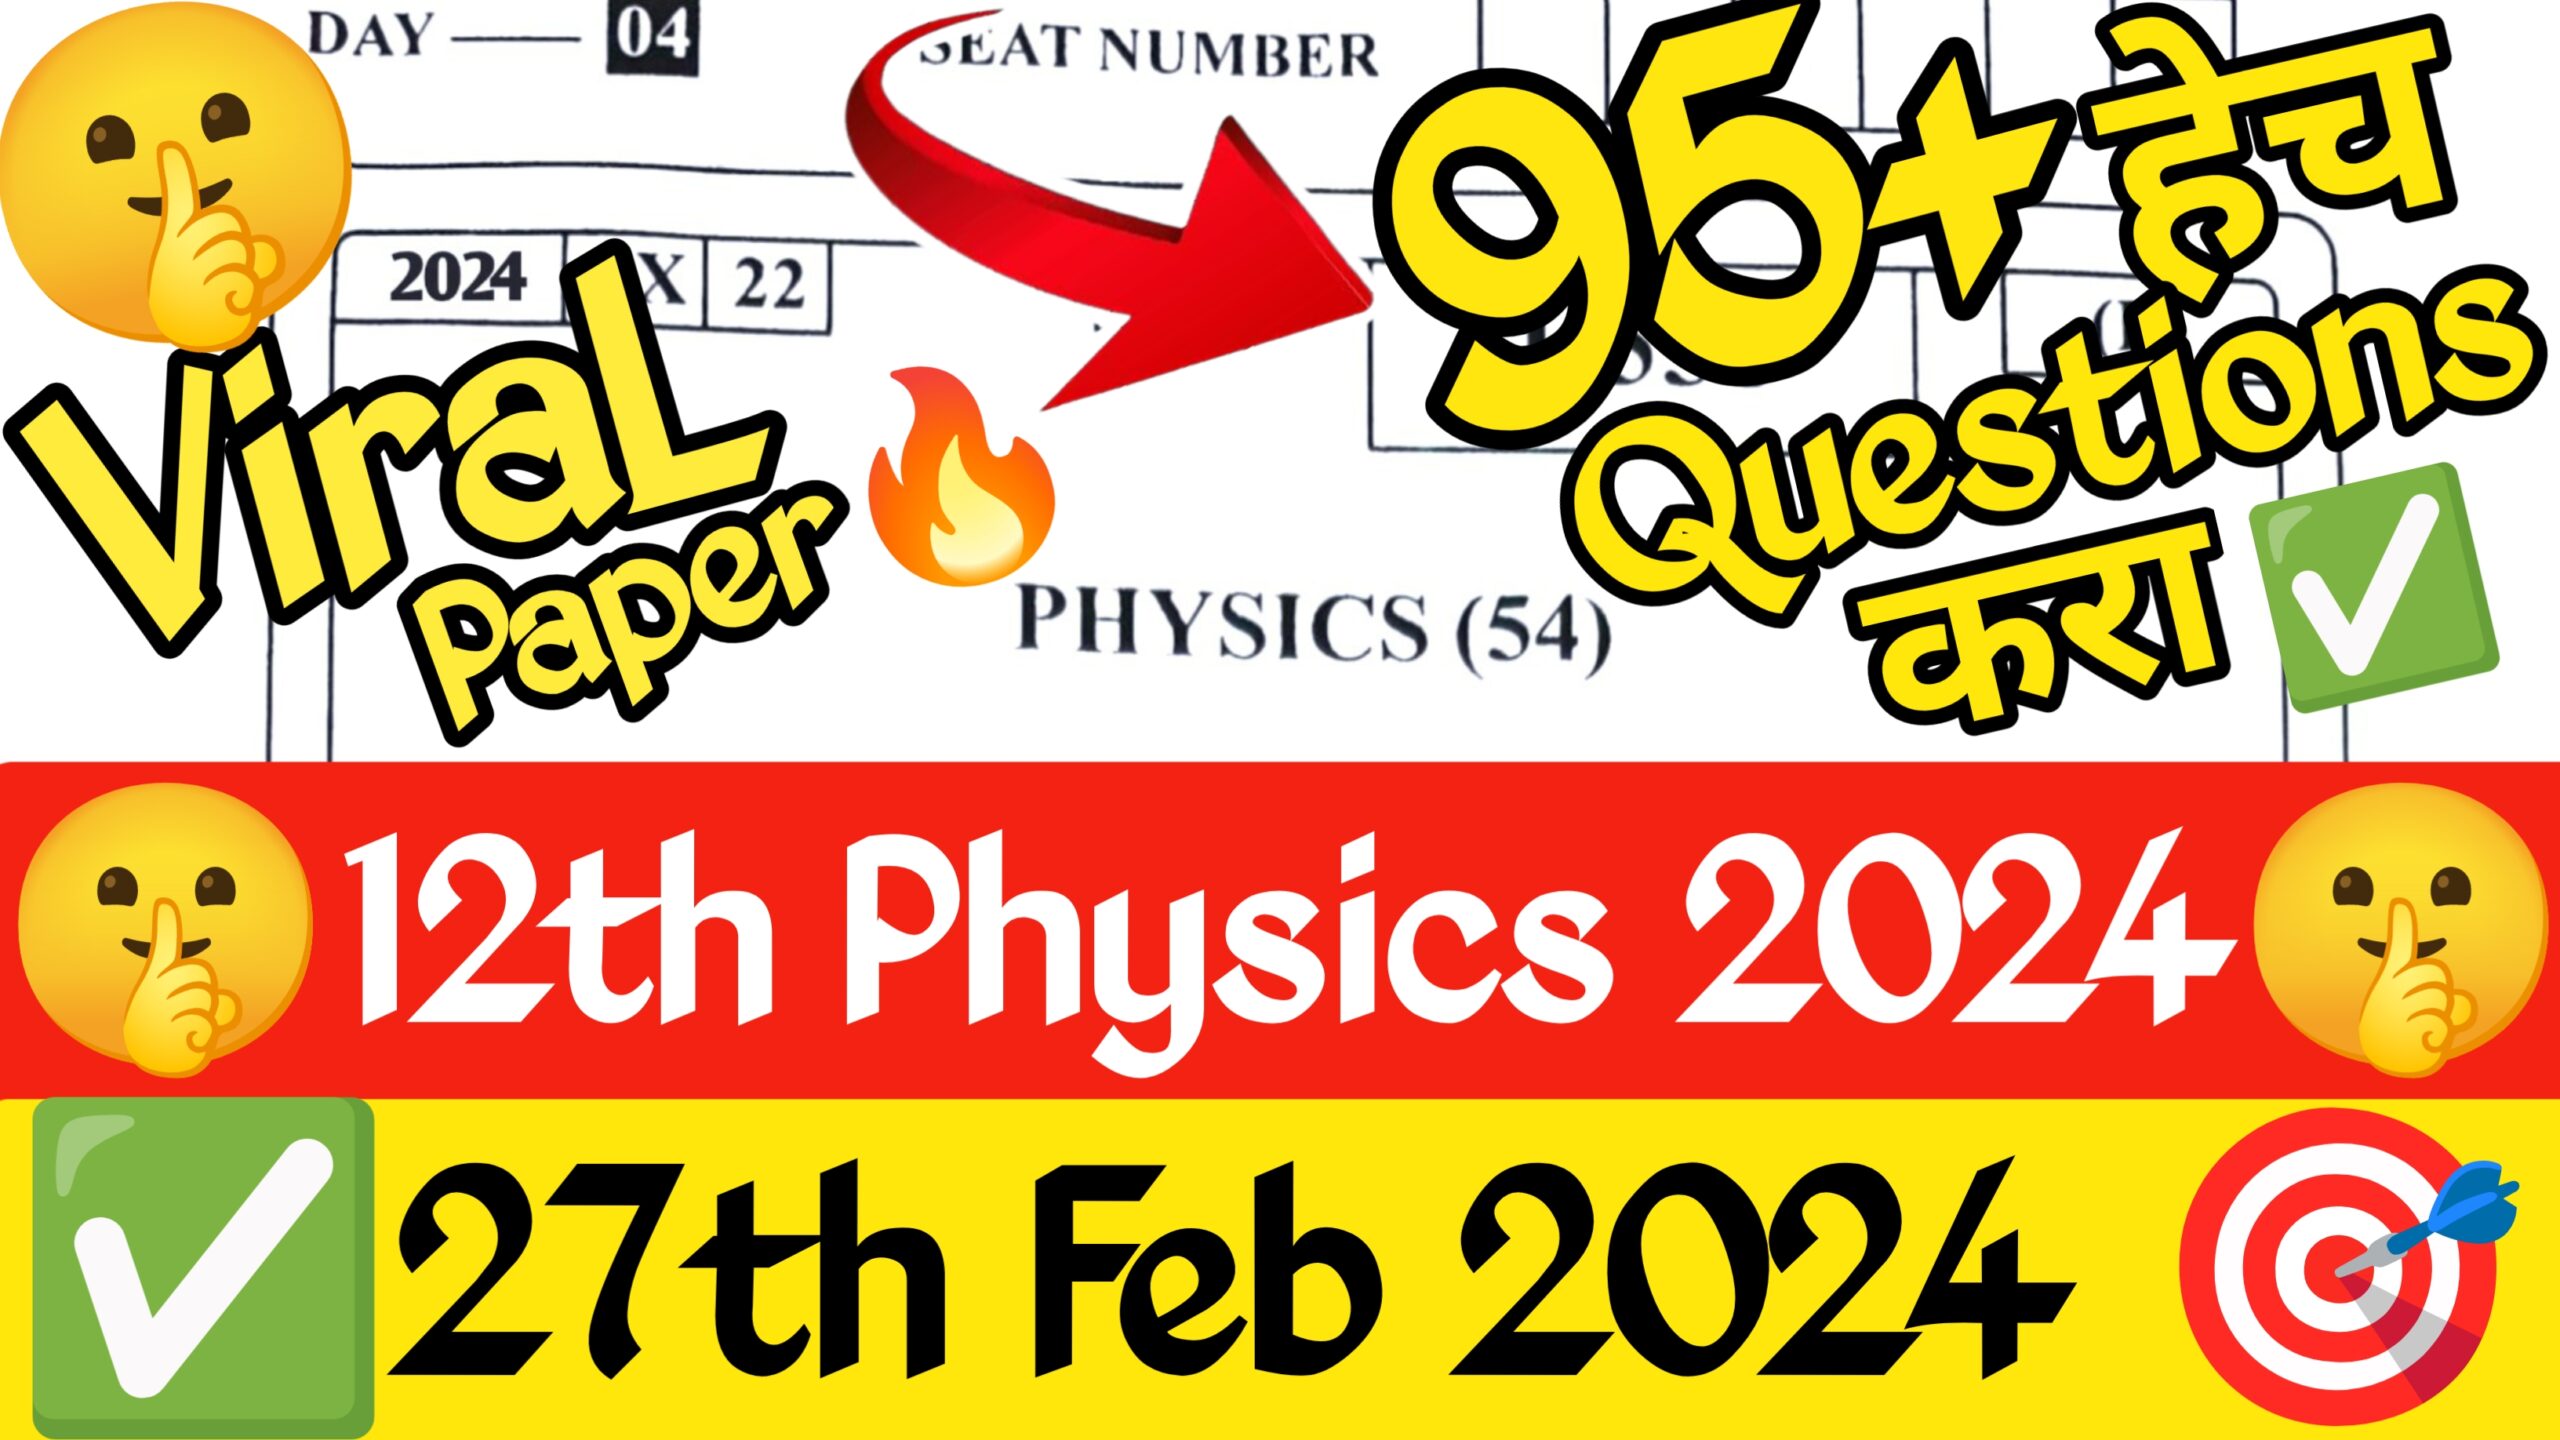 12th Physics Paper 2024 Maharashtra Board ( HSC Board All Sub Paper PDF Download), 12th Maharashtra Board physics paper 2024,HSC board physics Paper 2024, Maharashtra 12th Board previous Year Question paper, 12th physics question paper 2024